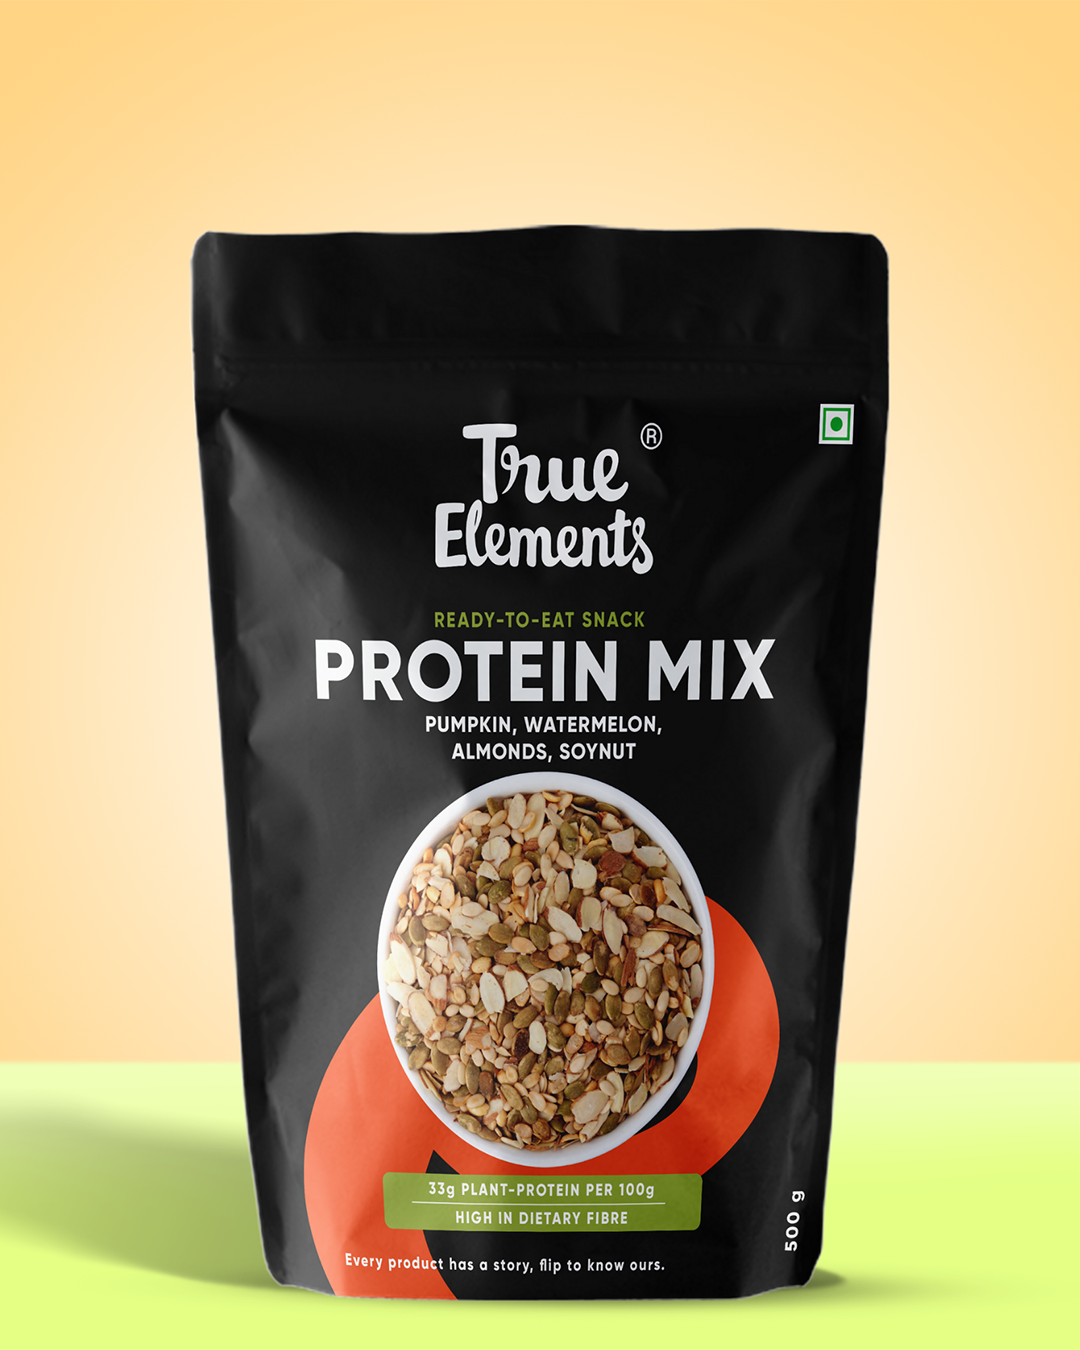 Protein mix with pumpkin, watermelon, almonds & soy in 500g pouch.